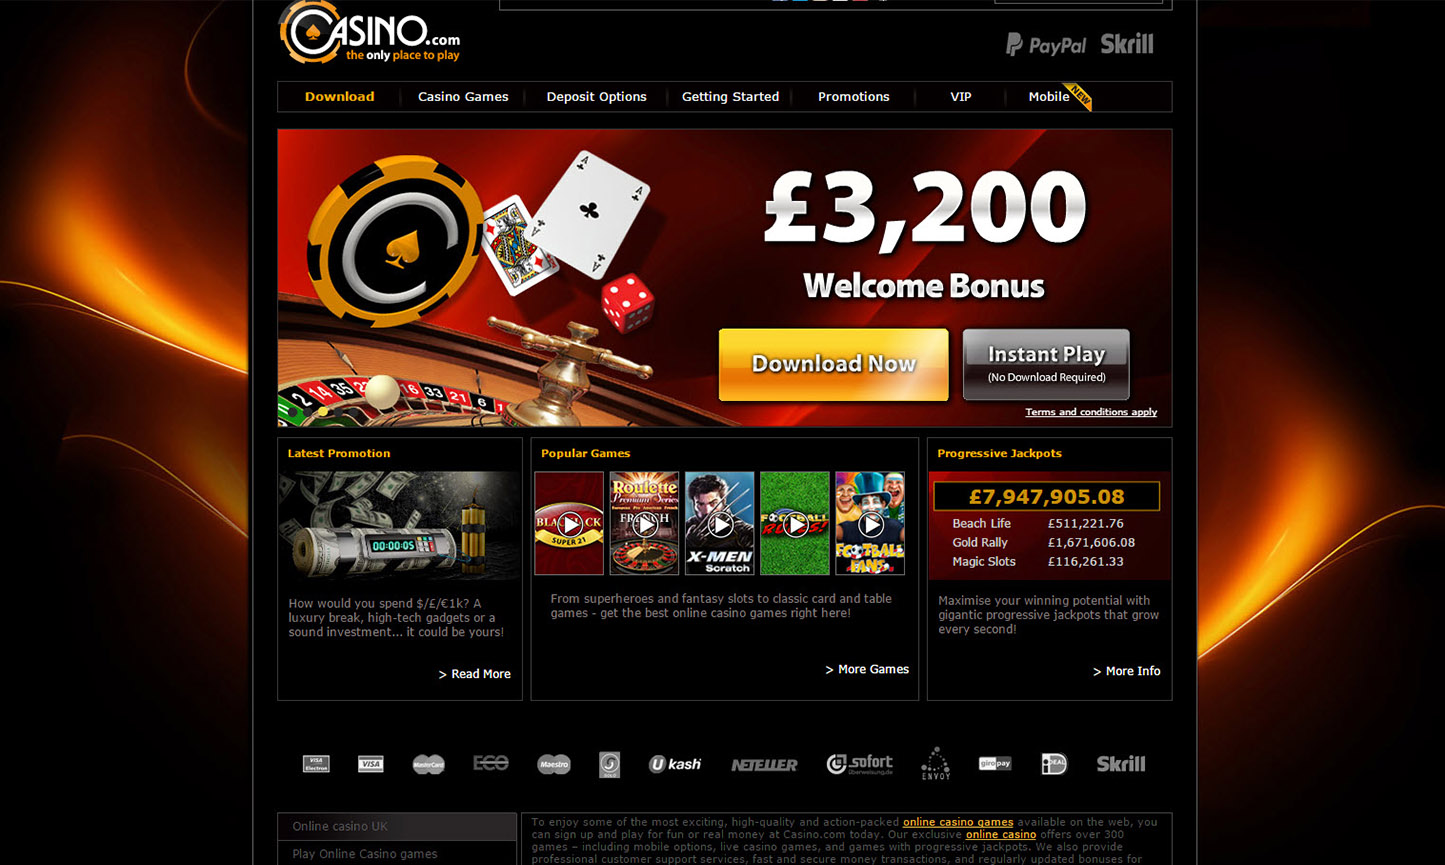 Best online casino sites powered by smf frank casino me